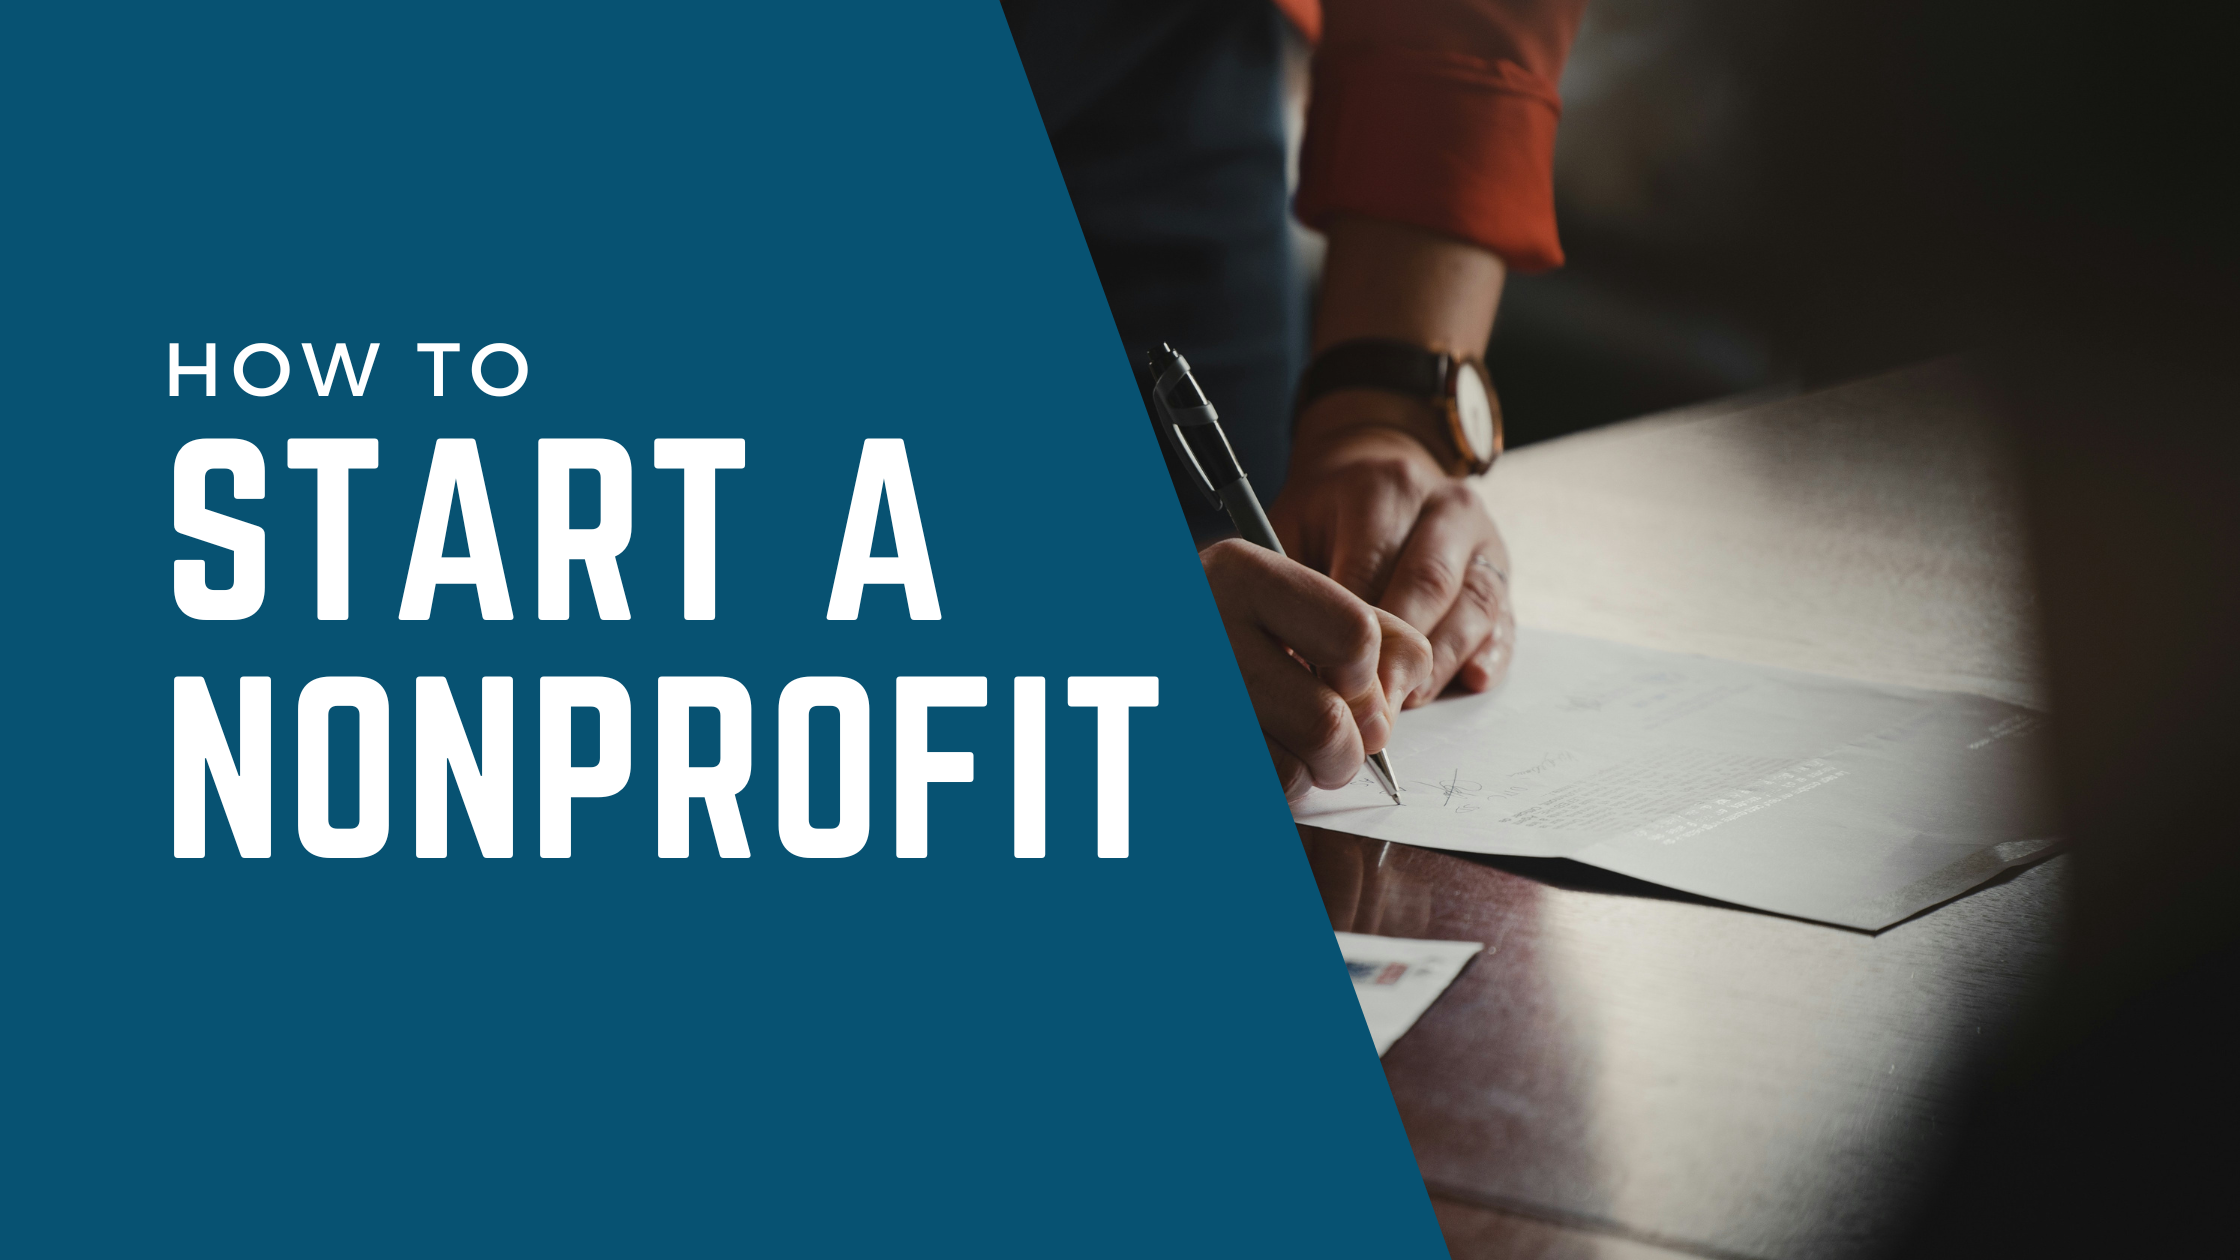 How to start a nonprofit